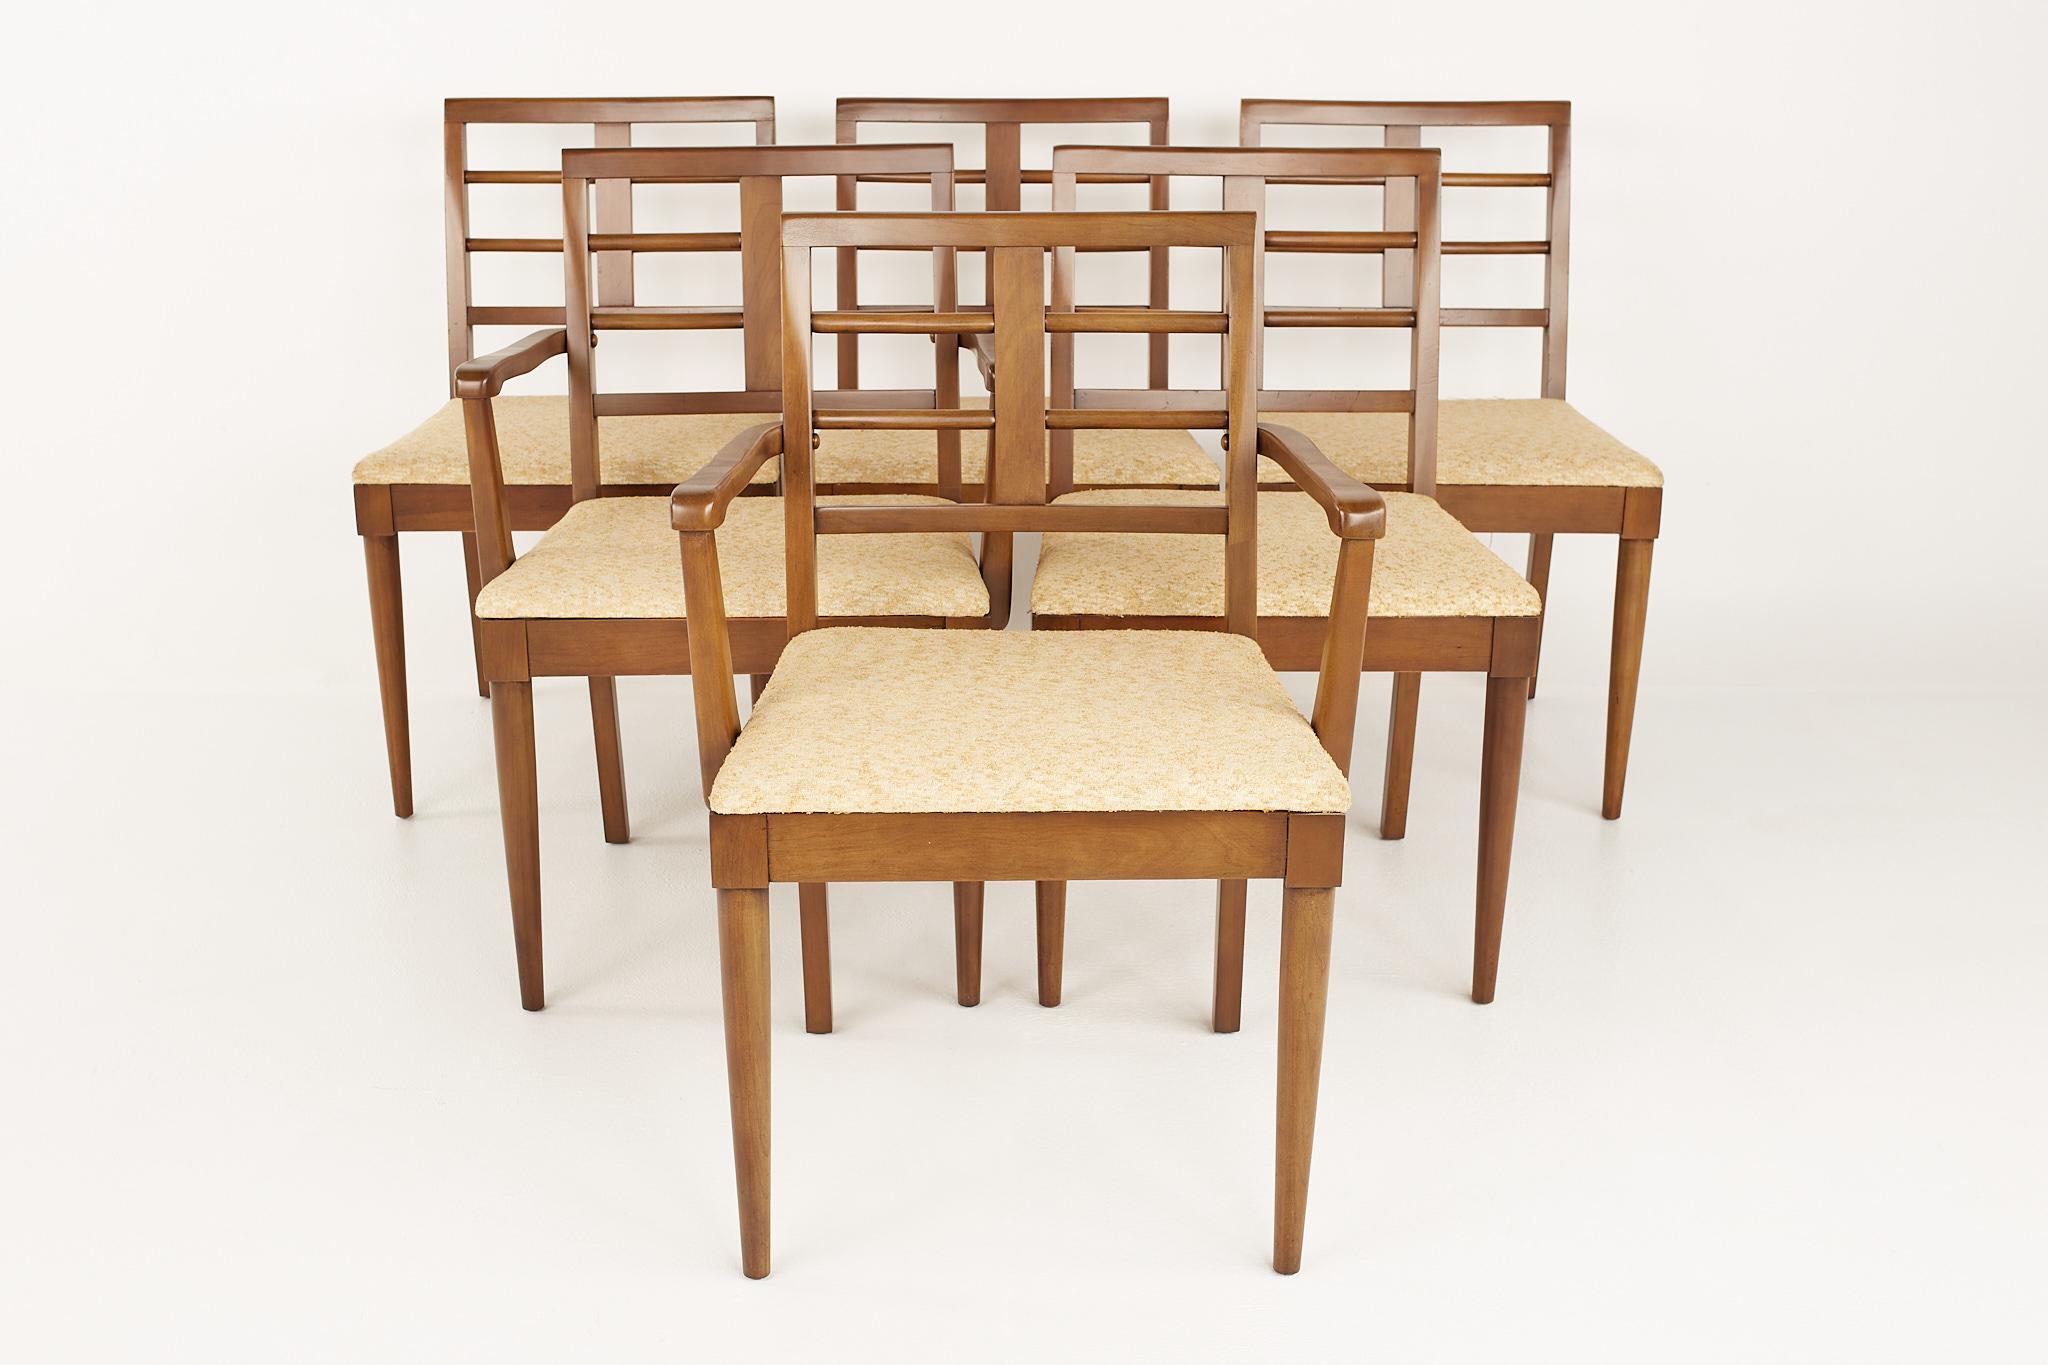 Paul Frankl Style mid century cherry dining chairs - set of 6

Each chair measures: 22 wide x 20.25 deep x 32.5 high, with a seat height of 17.5 inches and arm height/chair clearance of 25.75 inches

All pieces of furniture can be had in what we